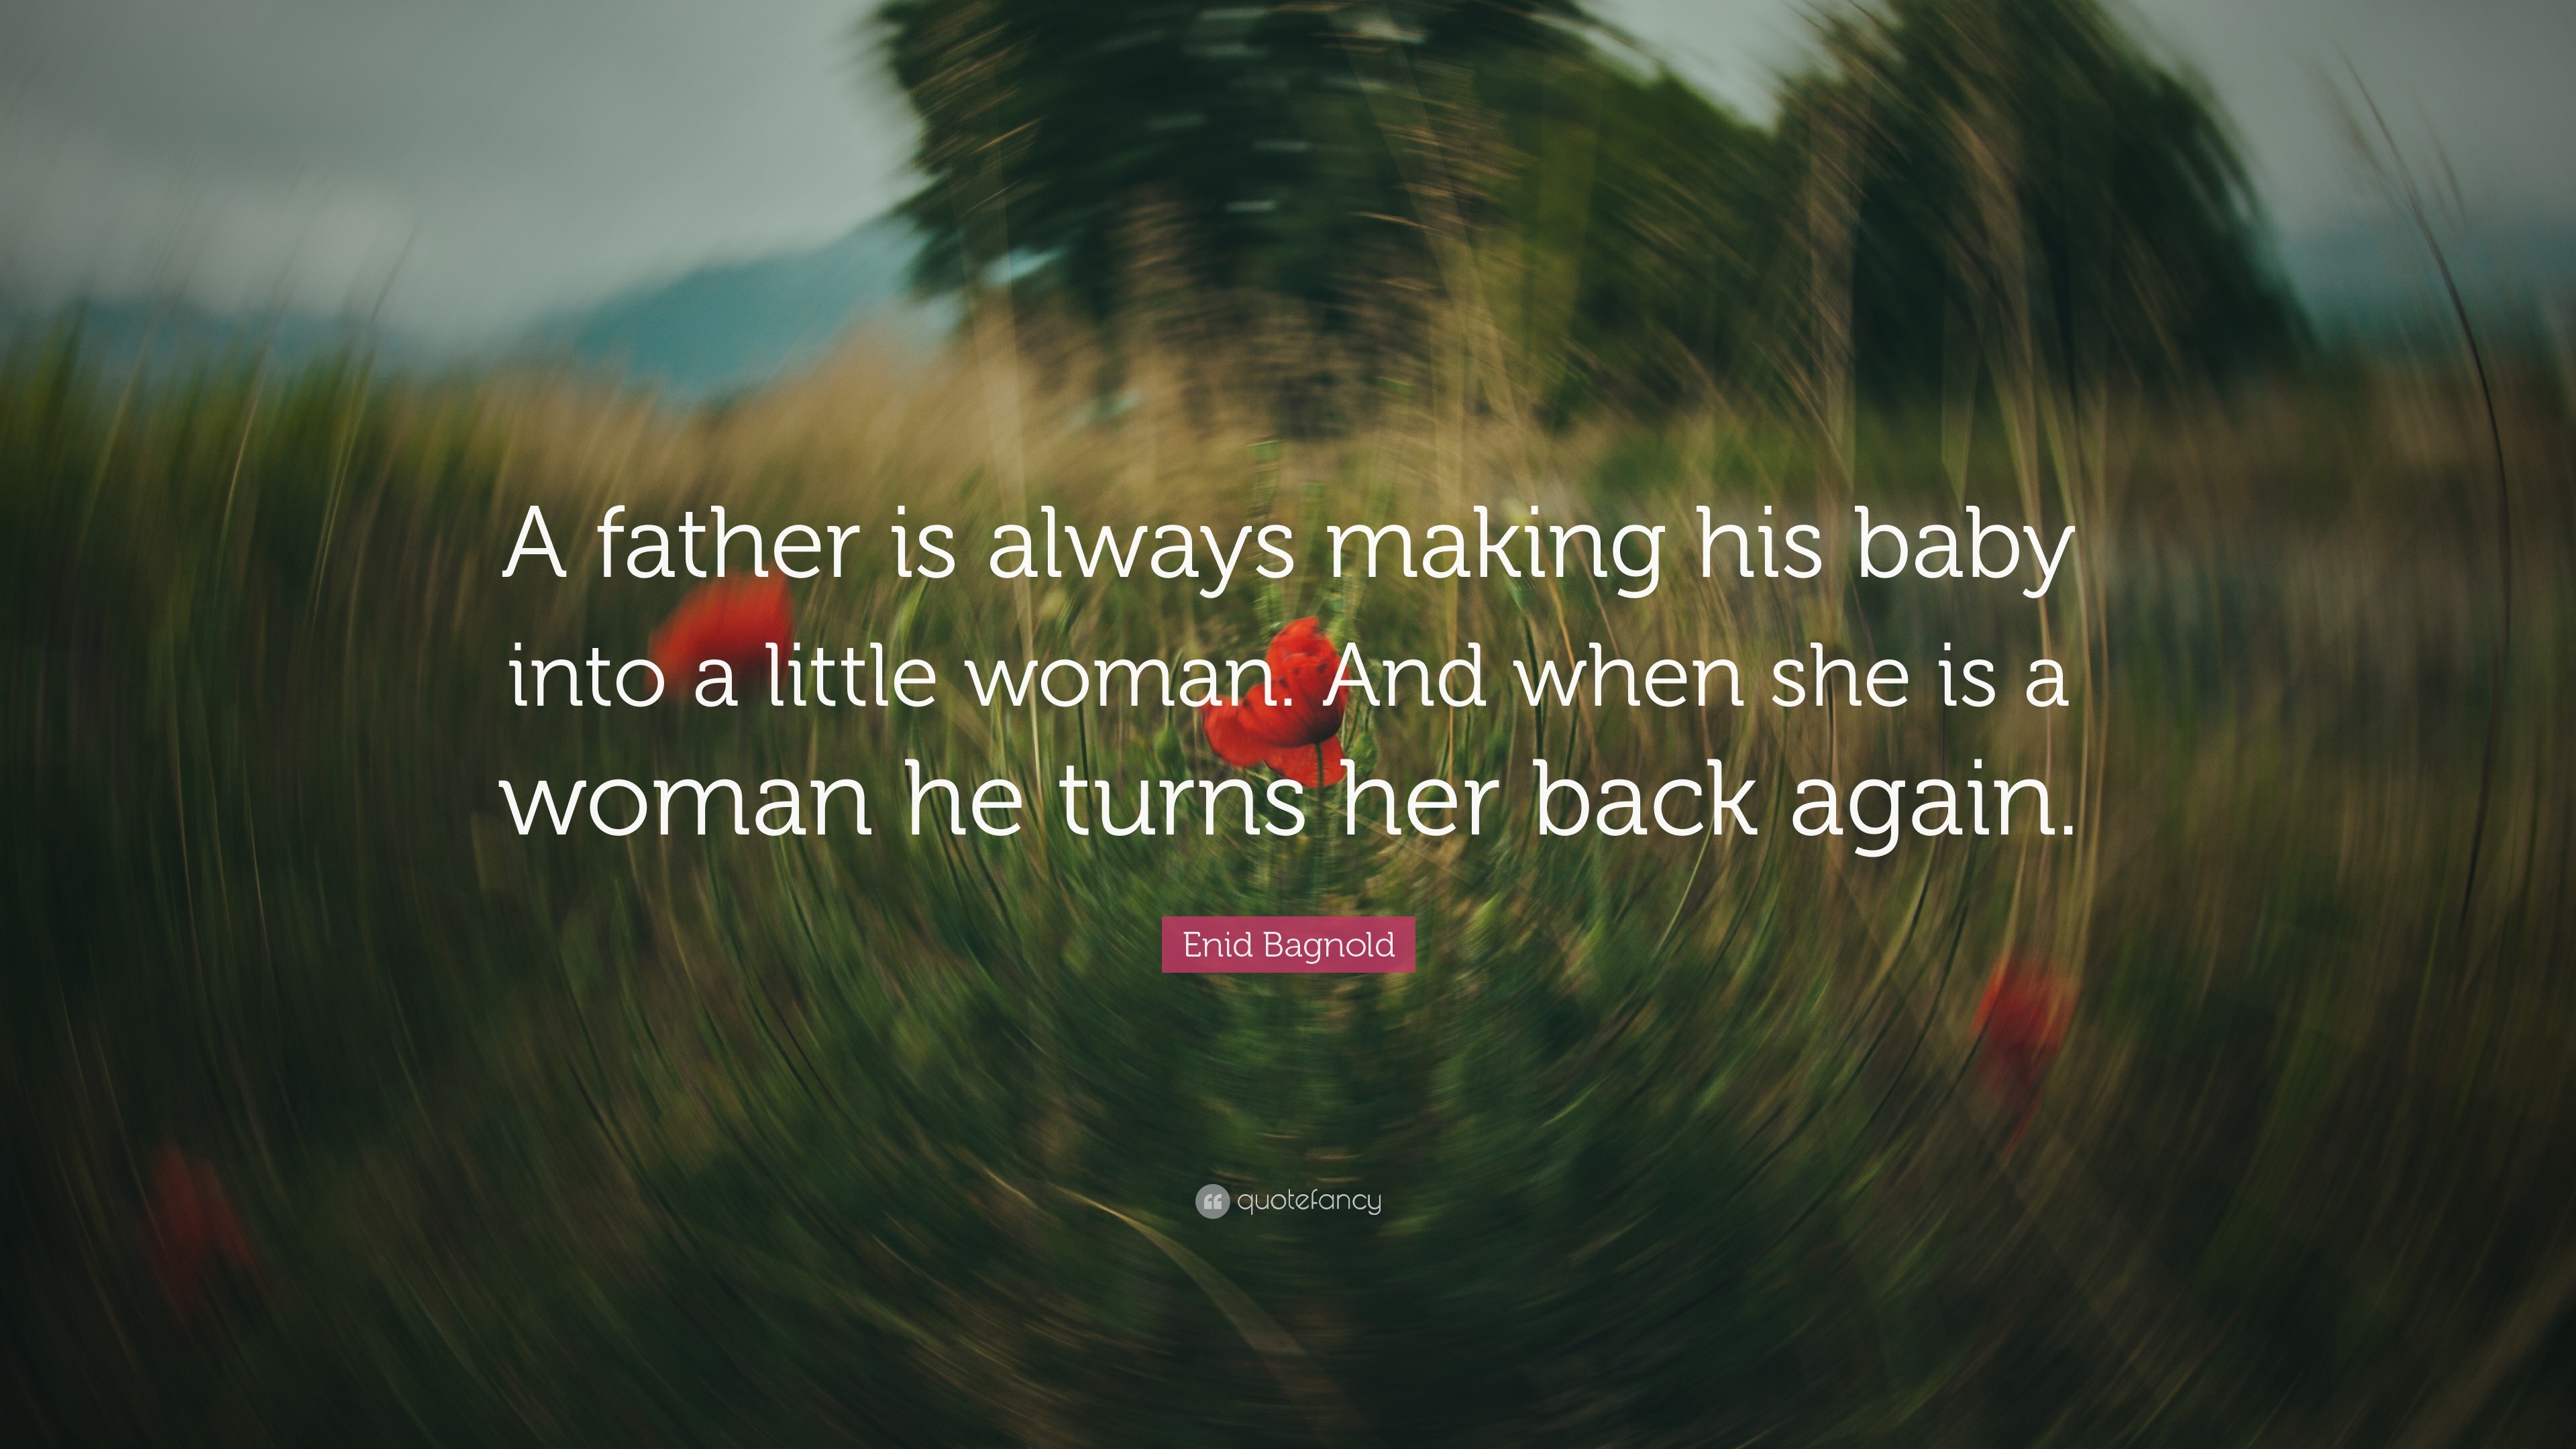 Enid Bagnold Quote “A father is always making his baby into a little woman